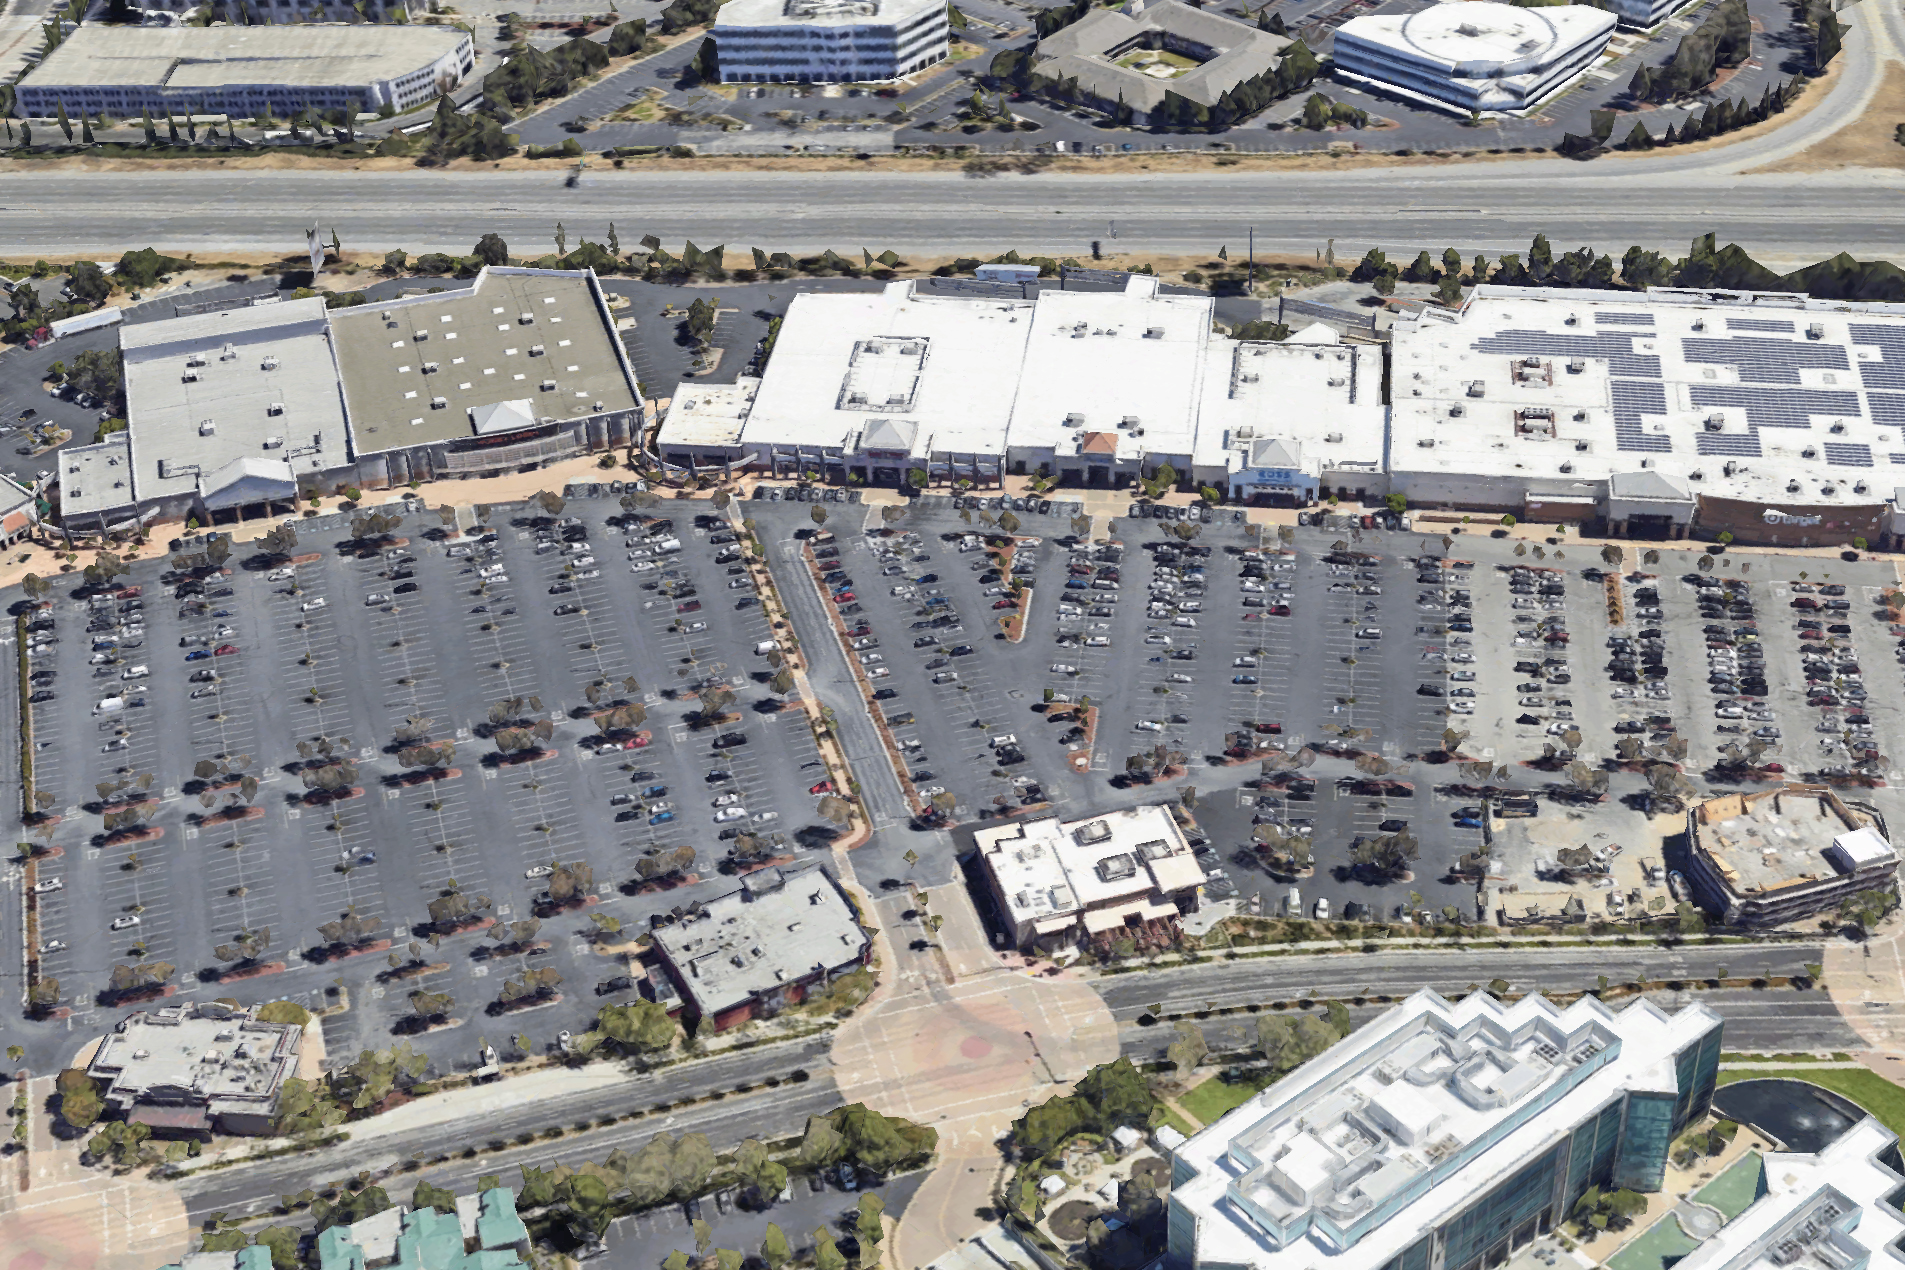 The image shows an aerial view of a large parking lot in front of several big retail stores, with many cars parked. Surrounding roads and buildings are visible.